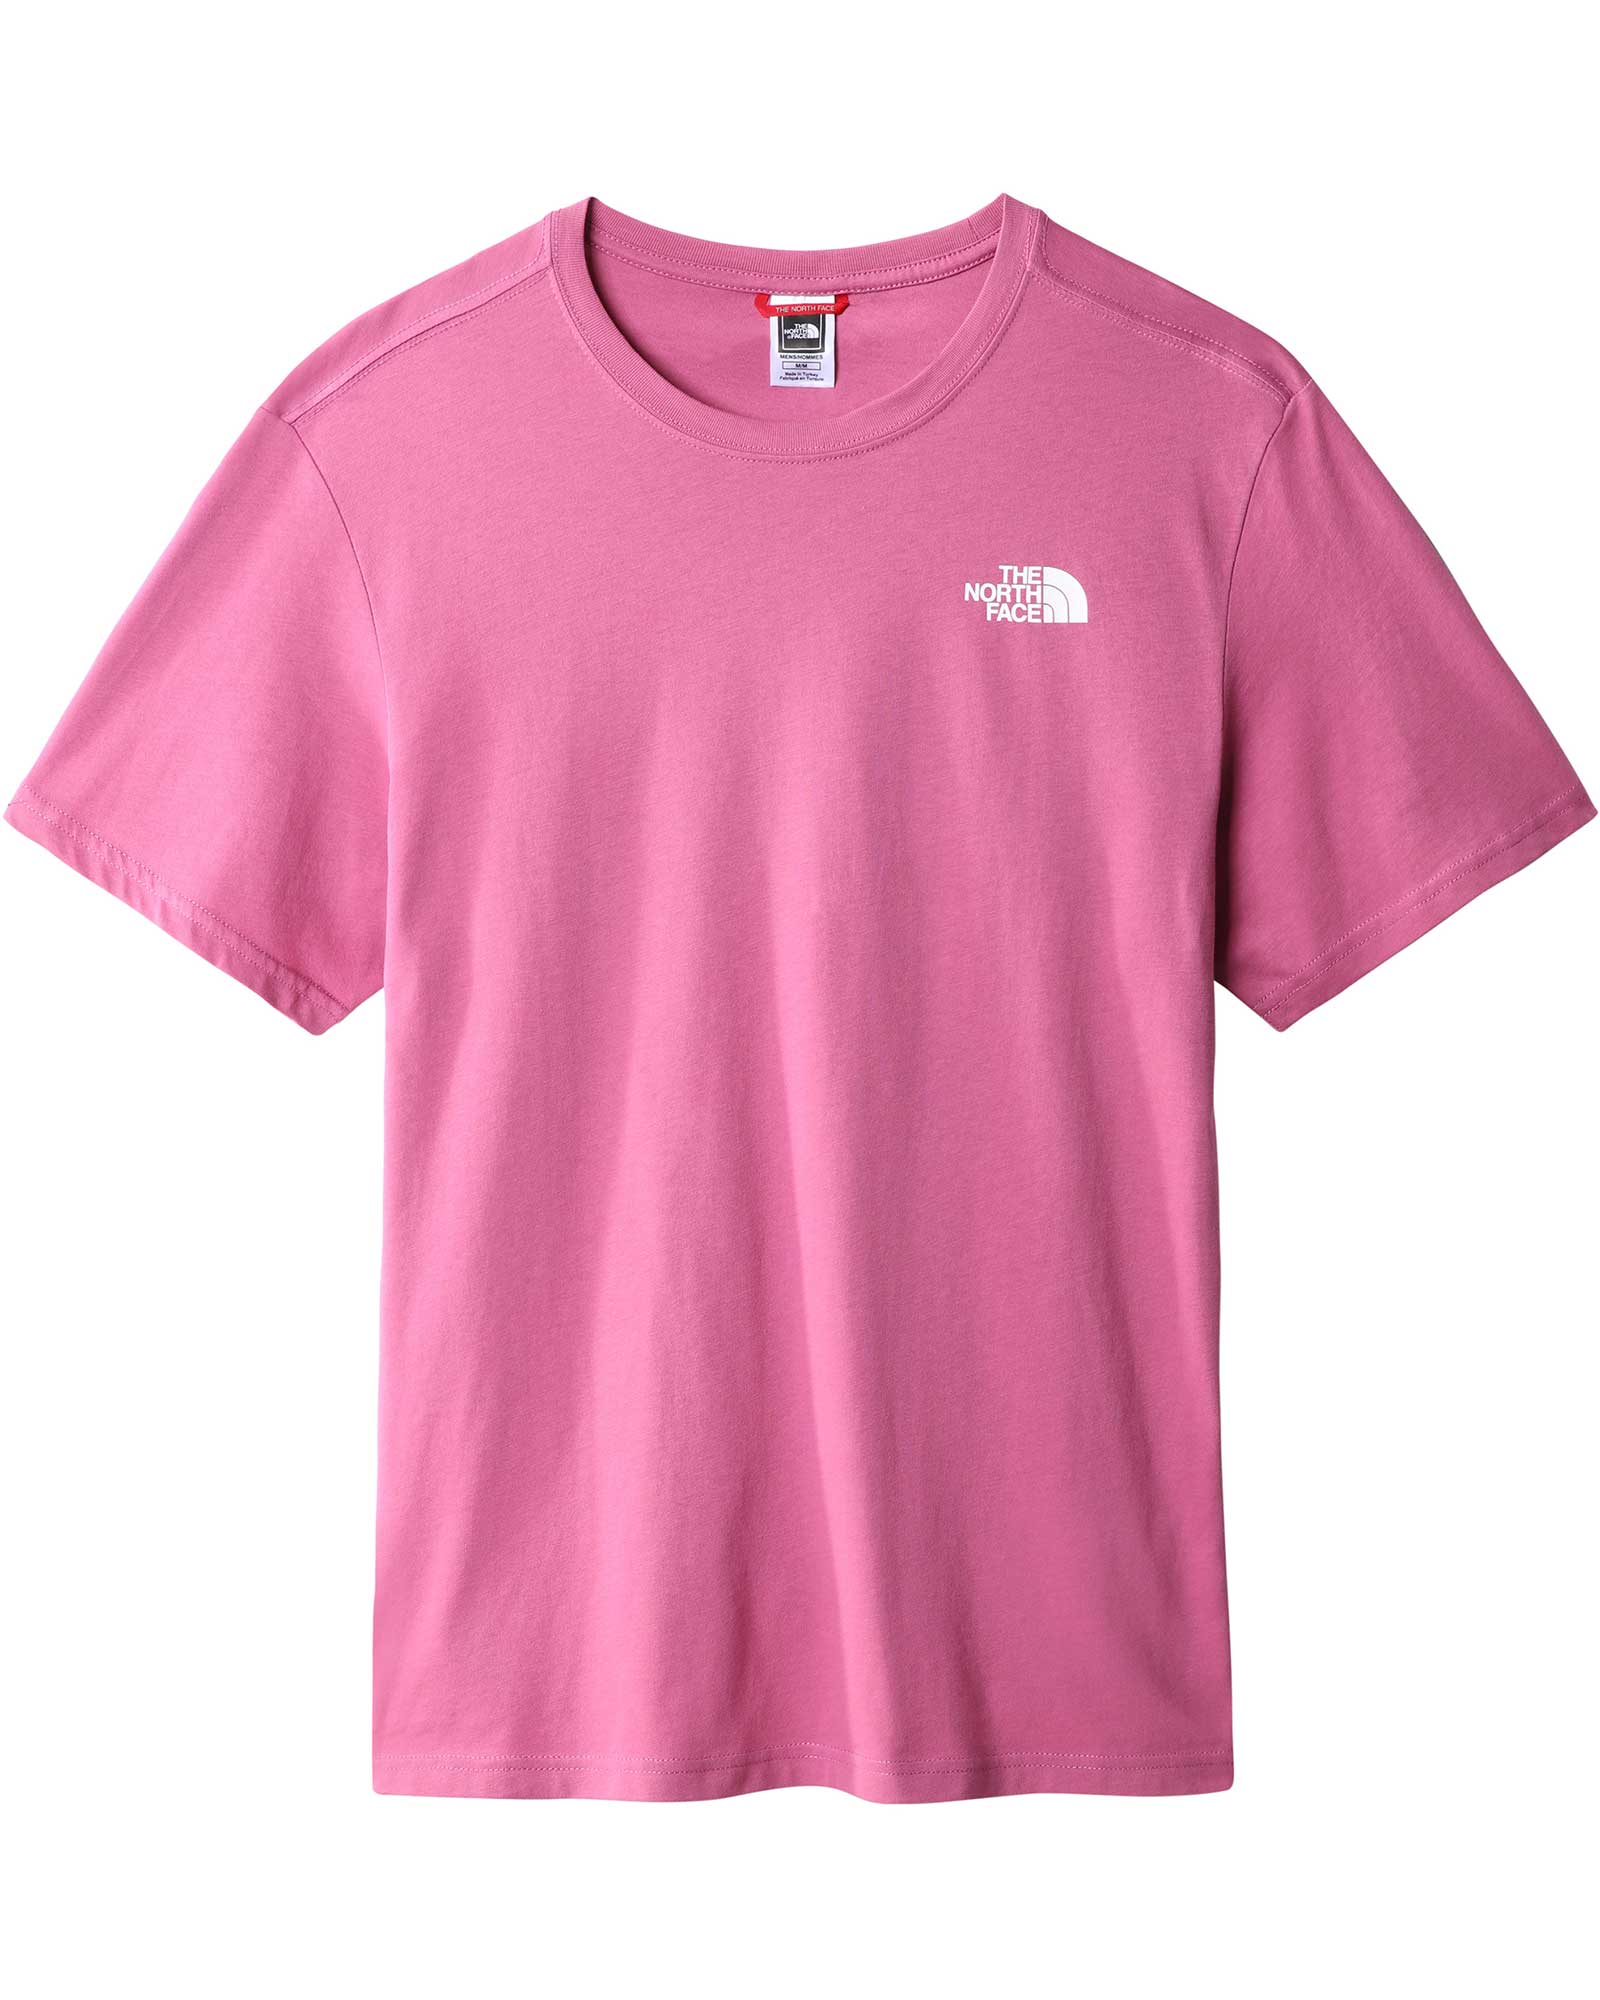 The North Face Red Box Men’s T Shirt - Red Violet XS